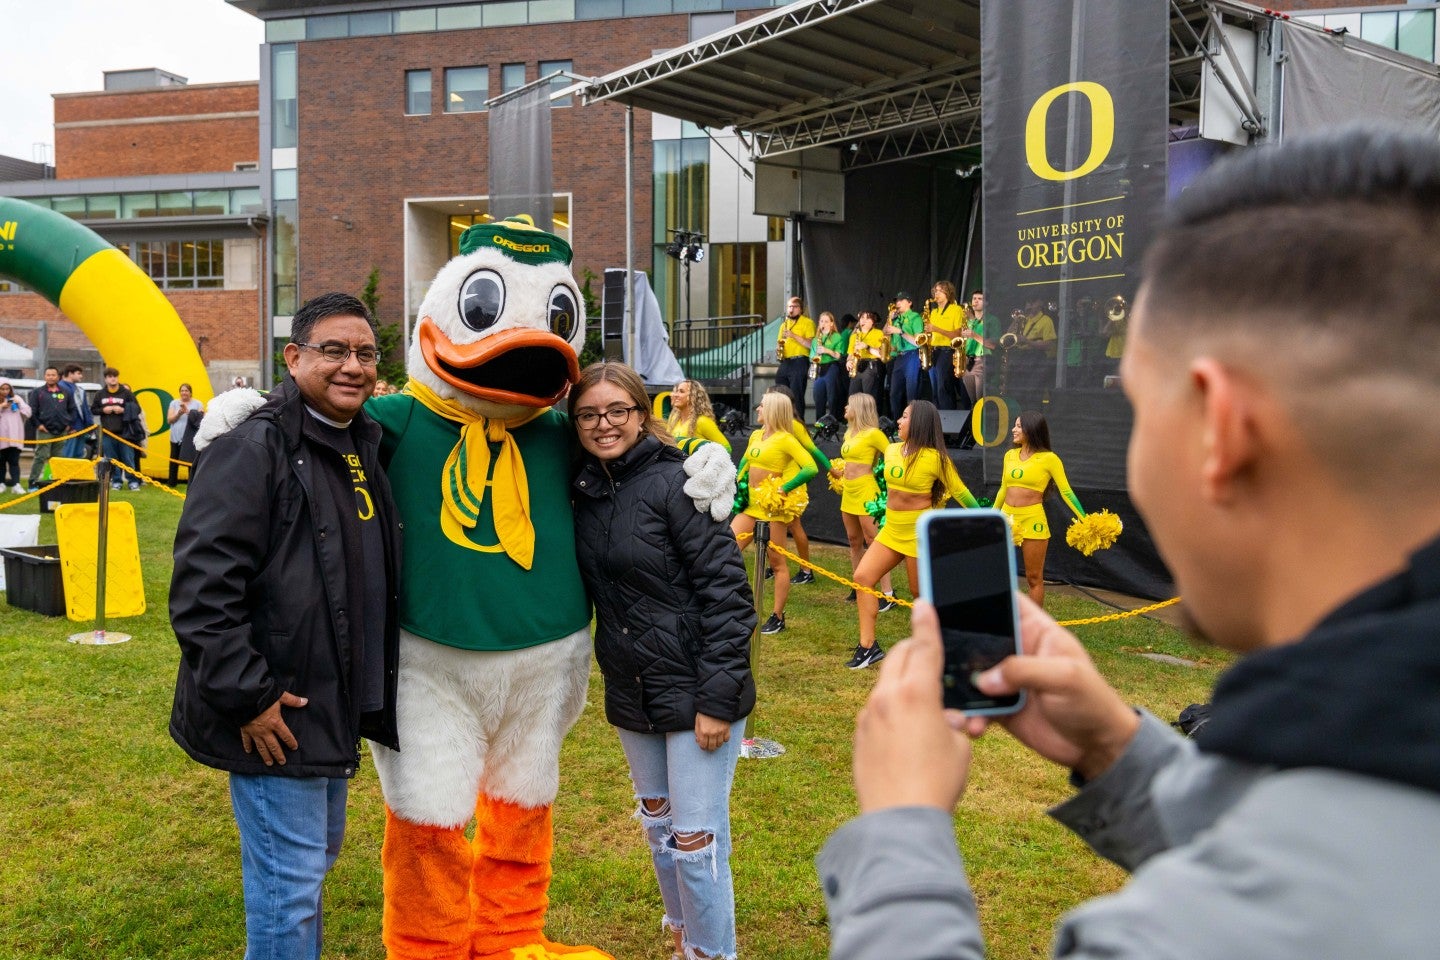 Man taking photo of student and parent posing with the UO Duck.